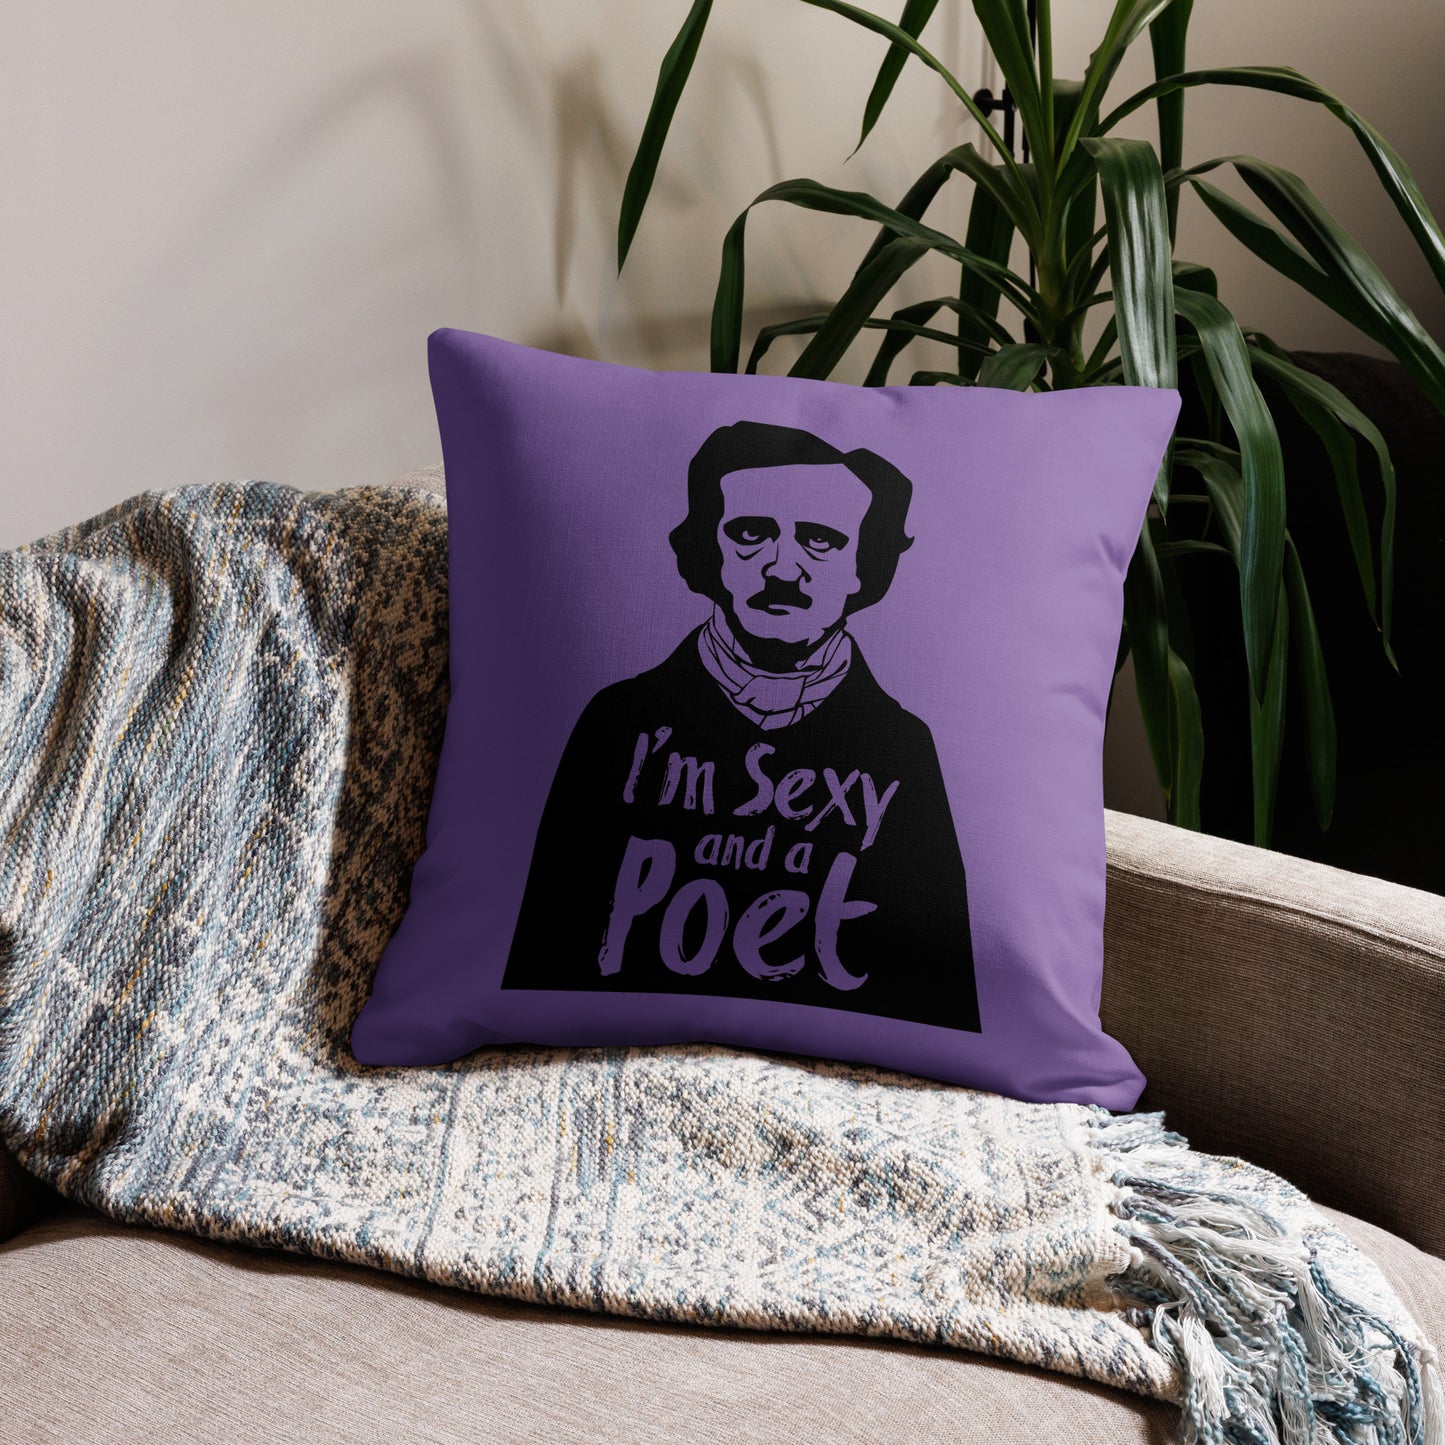 Products Edgar Allan Poe "I'm Sexy and a Poet" Premium Pillow - Purple 22 x 22